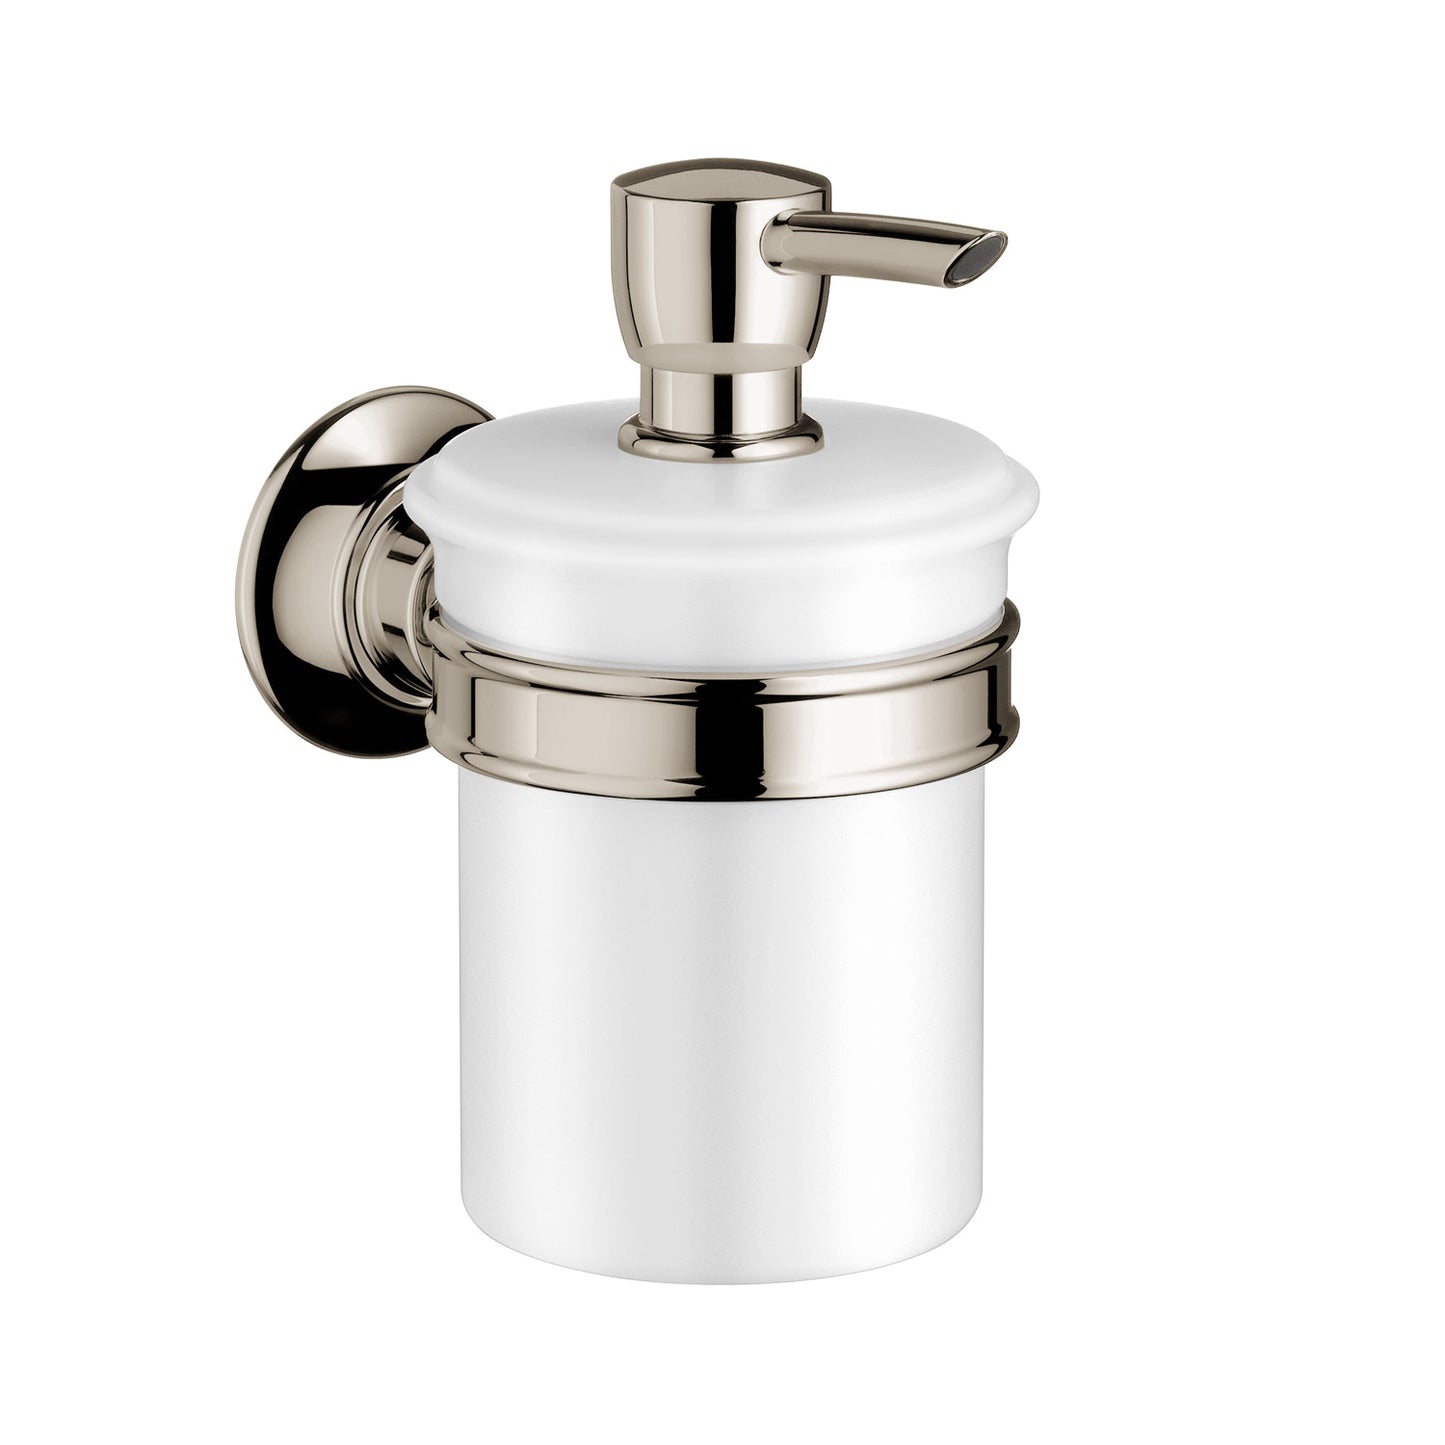 AXOR 42019830 Polished Nickel Montreux Classic Soap Dispenser